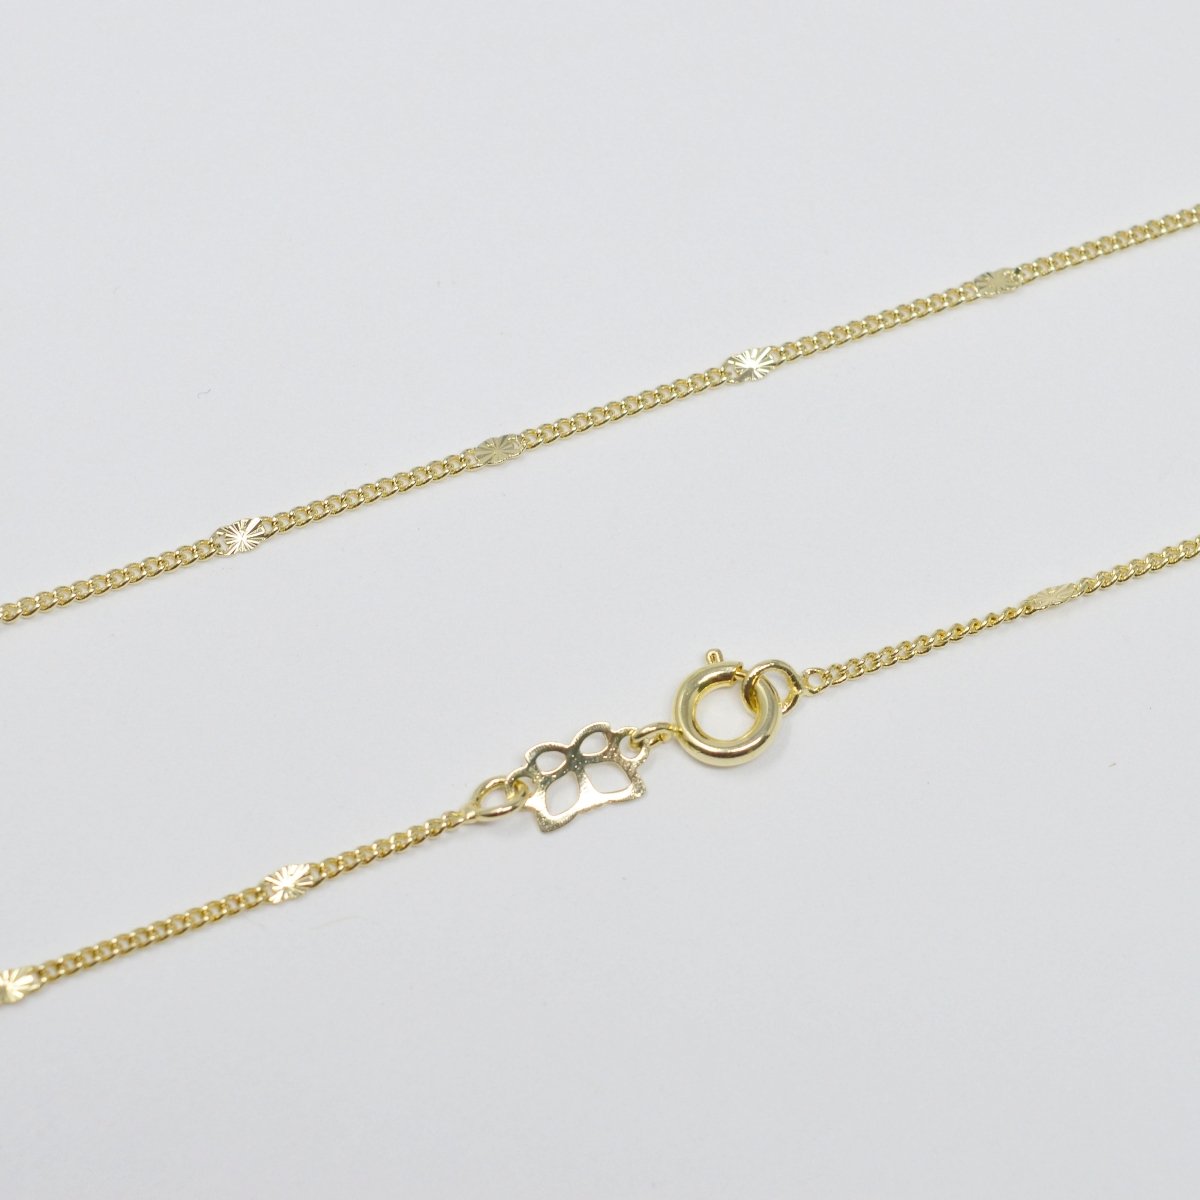 18 inch Singapore Chain Necklace, 14K Gold Plated Singapore Finished Necklace For Jewelry Making, Dainty 2mm Singapore Necklace w/ Spring Ring | CN-958 Clearance Pricing - DLUXCA